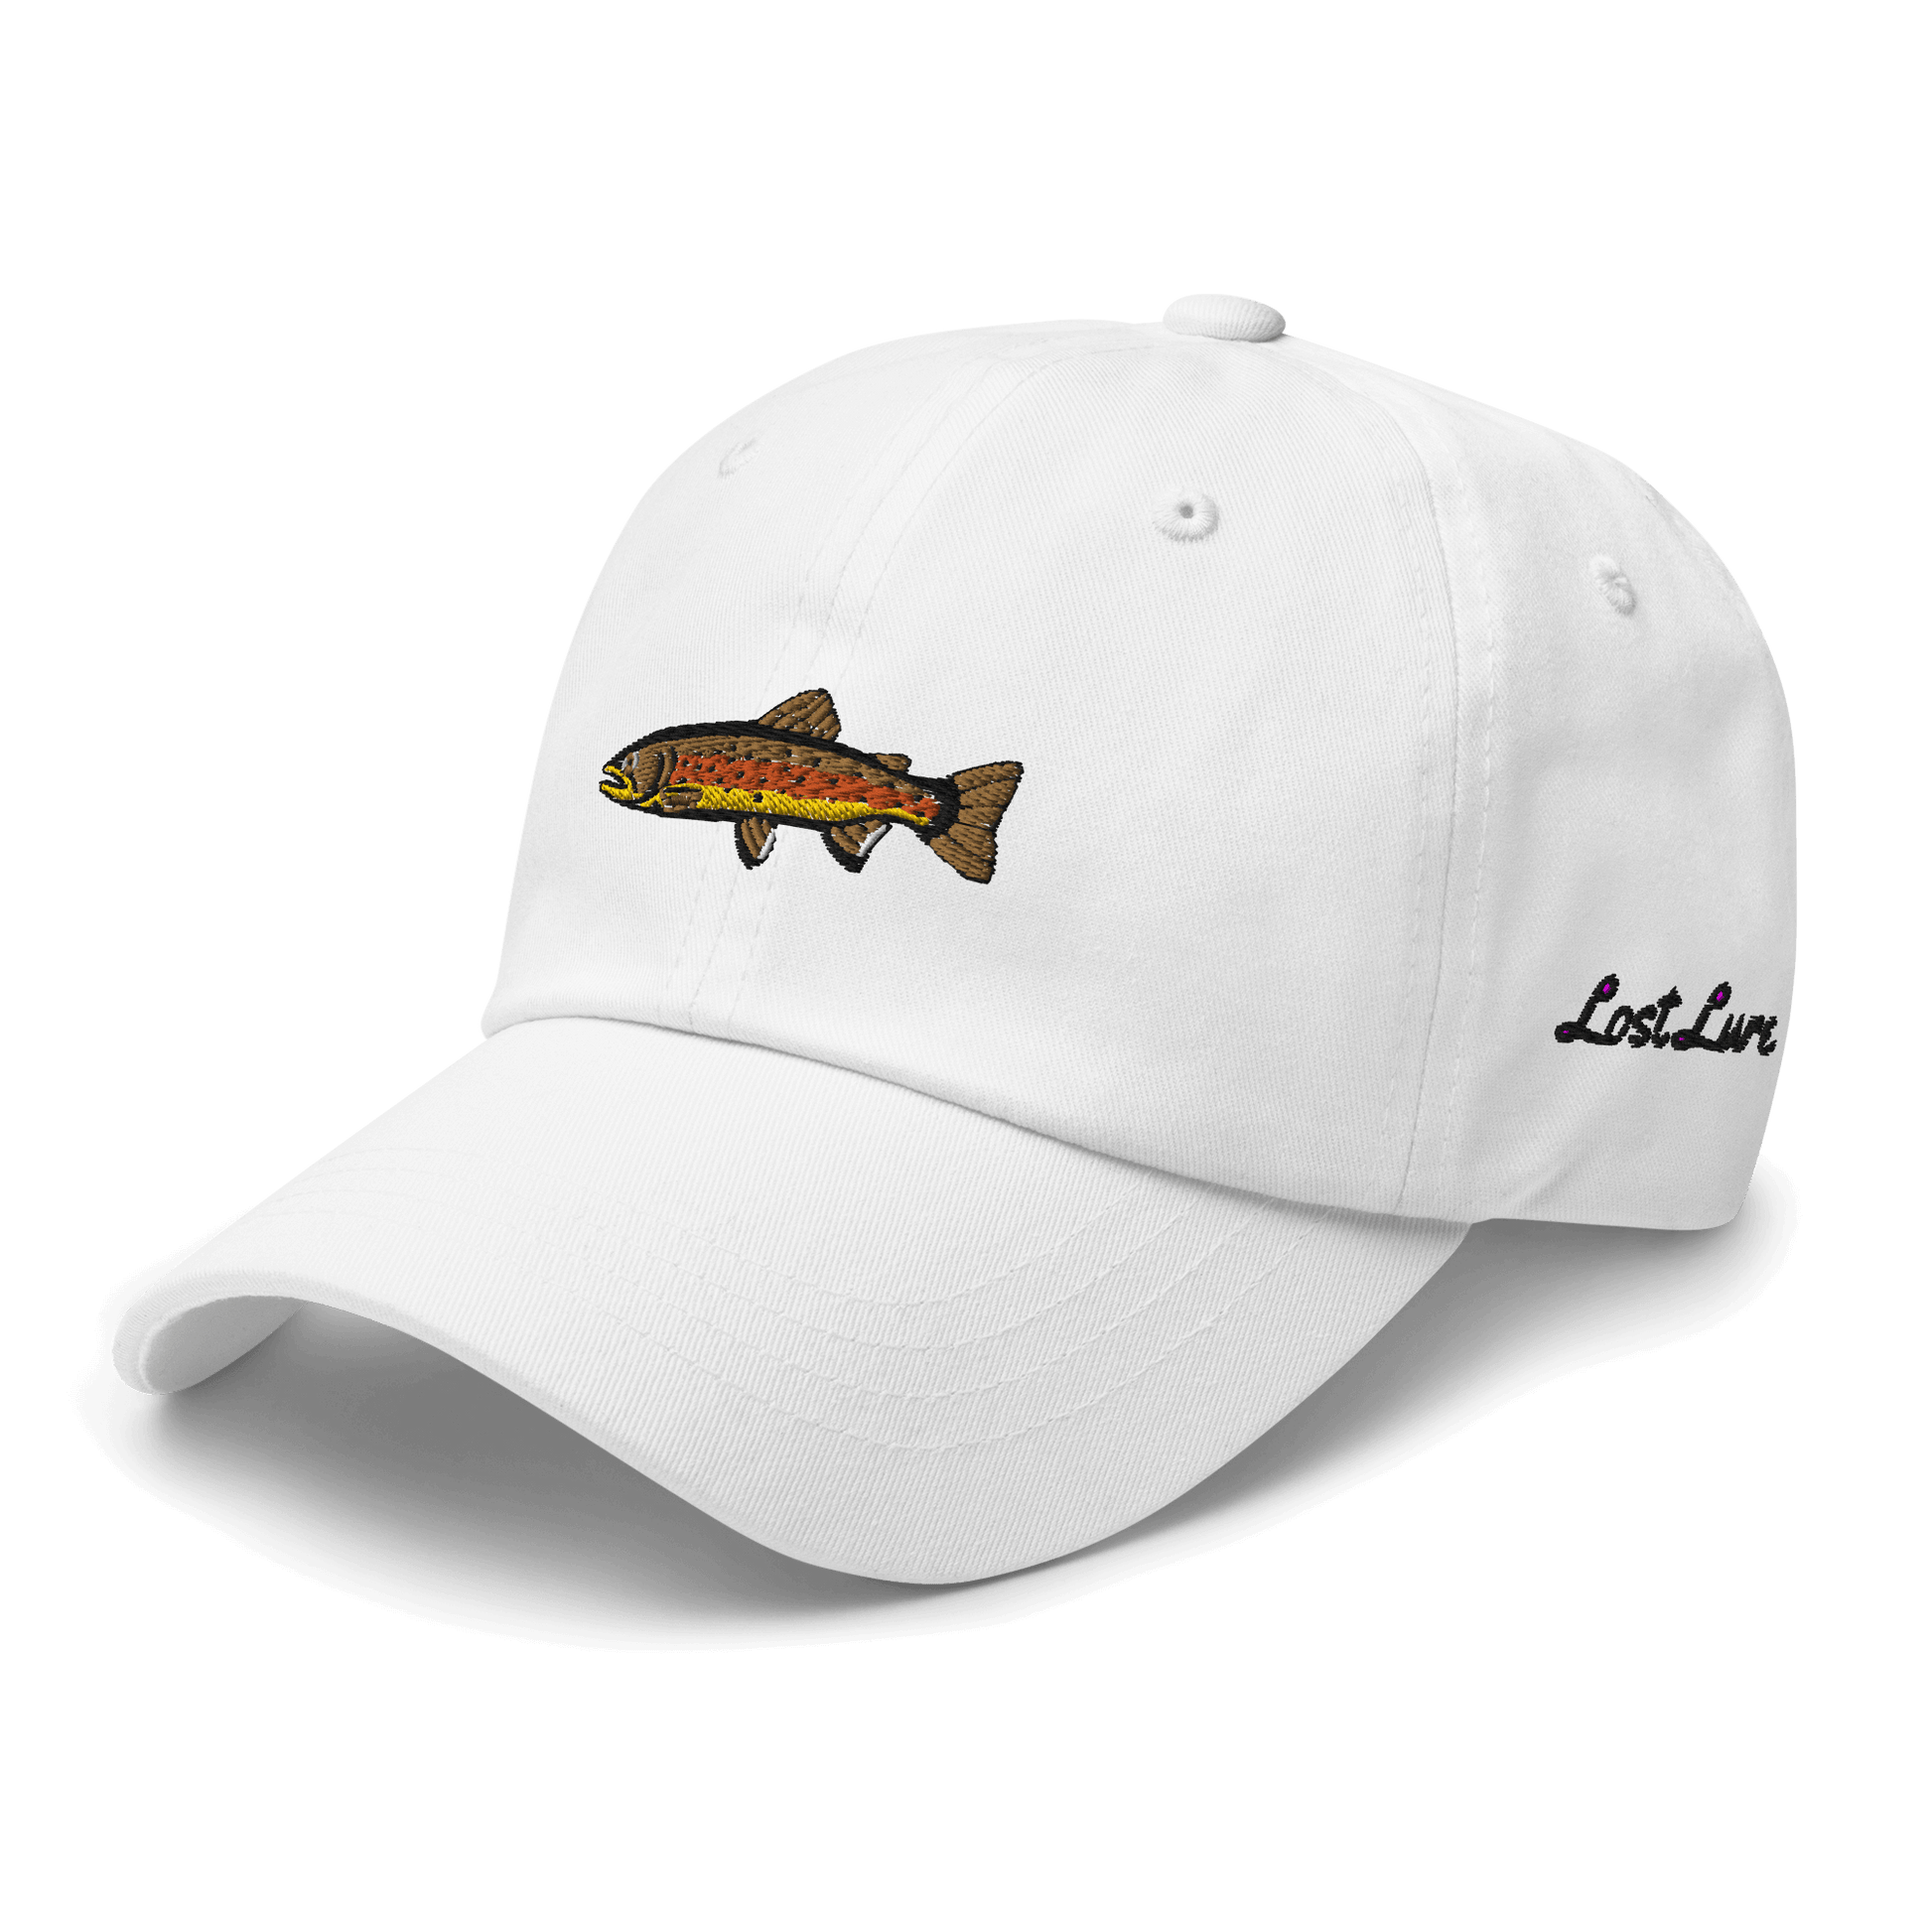 Brown Trout Fishing Hat Pink